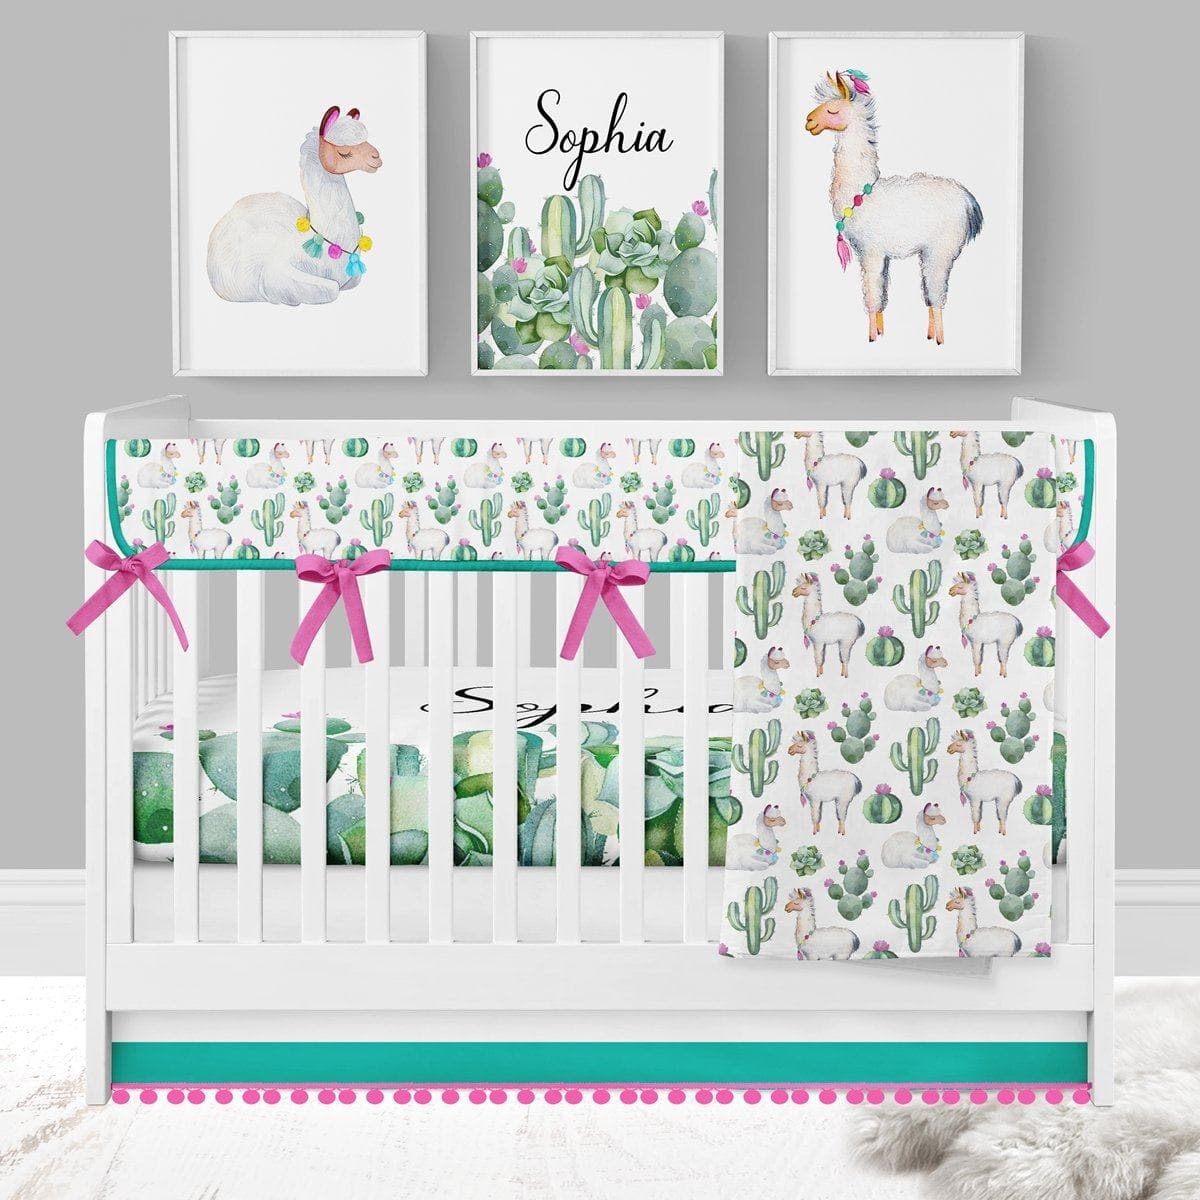 Llama Love Personalized Cactus Crib Sheet - gender_girl, Personalized_Yes, text